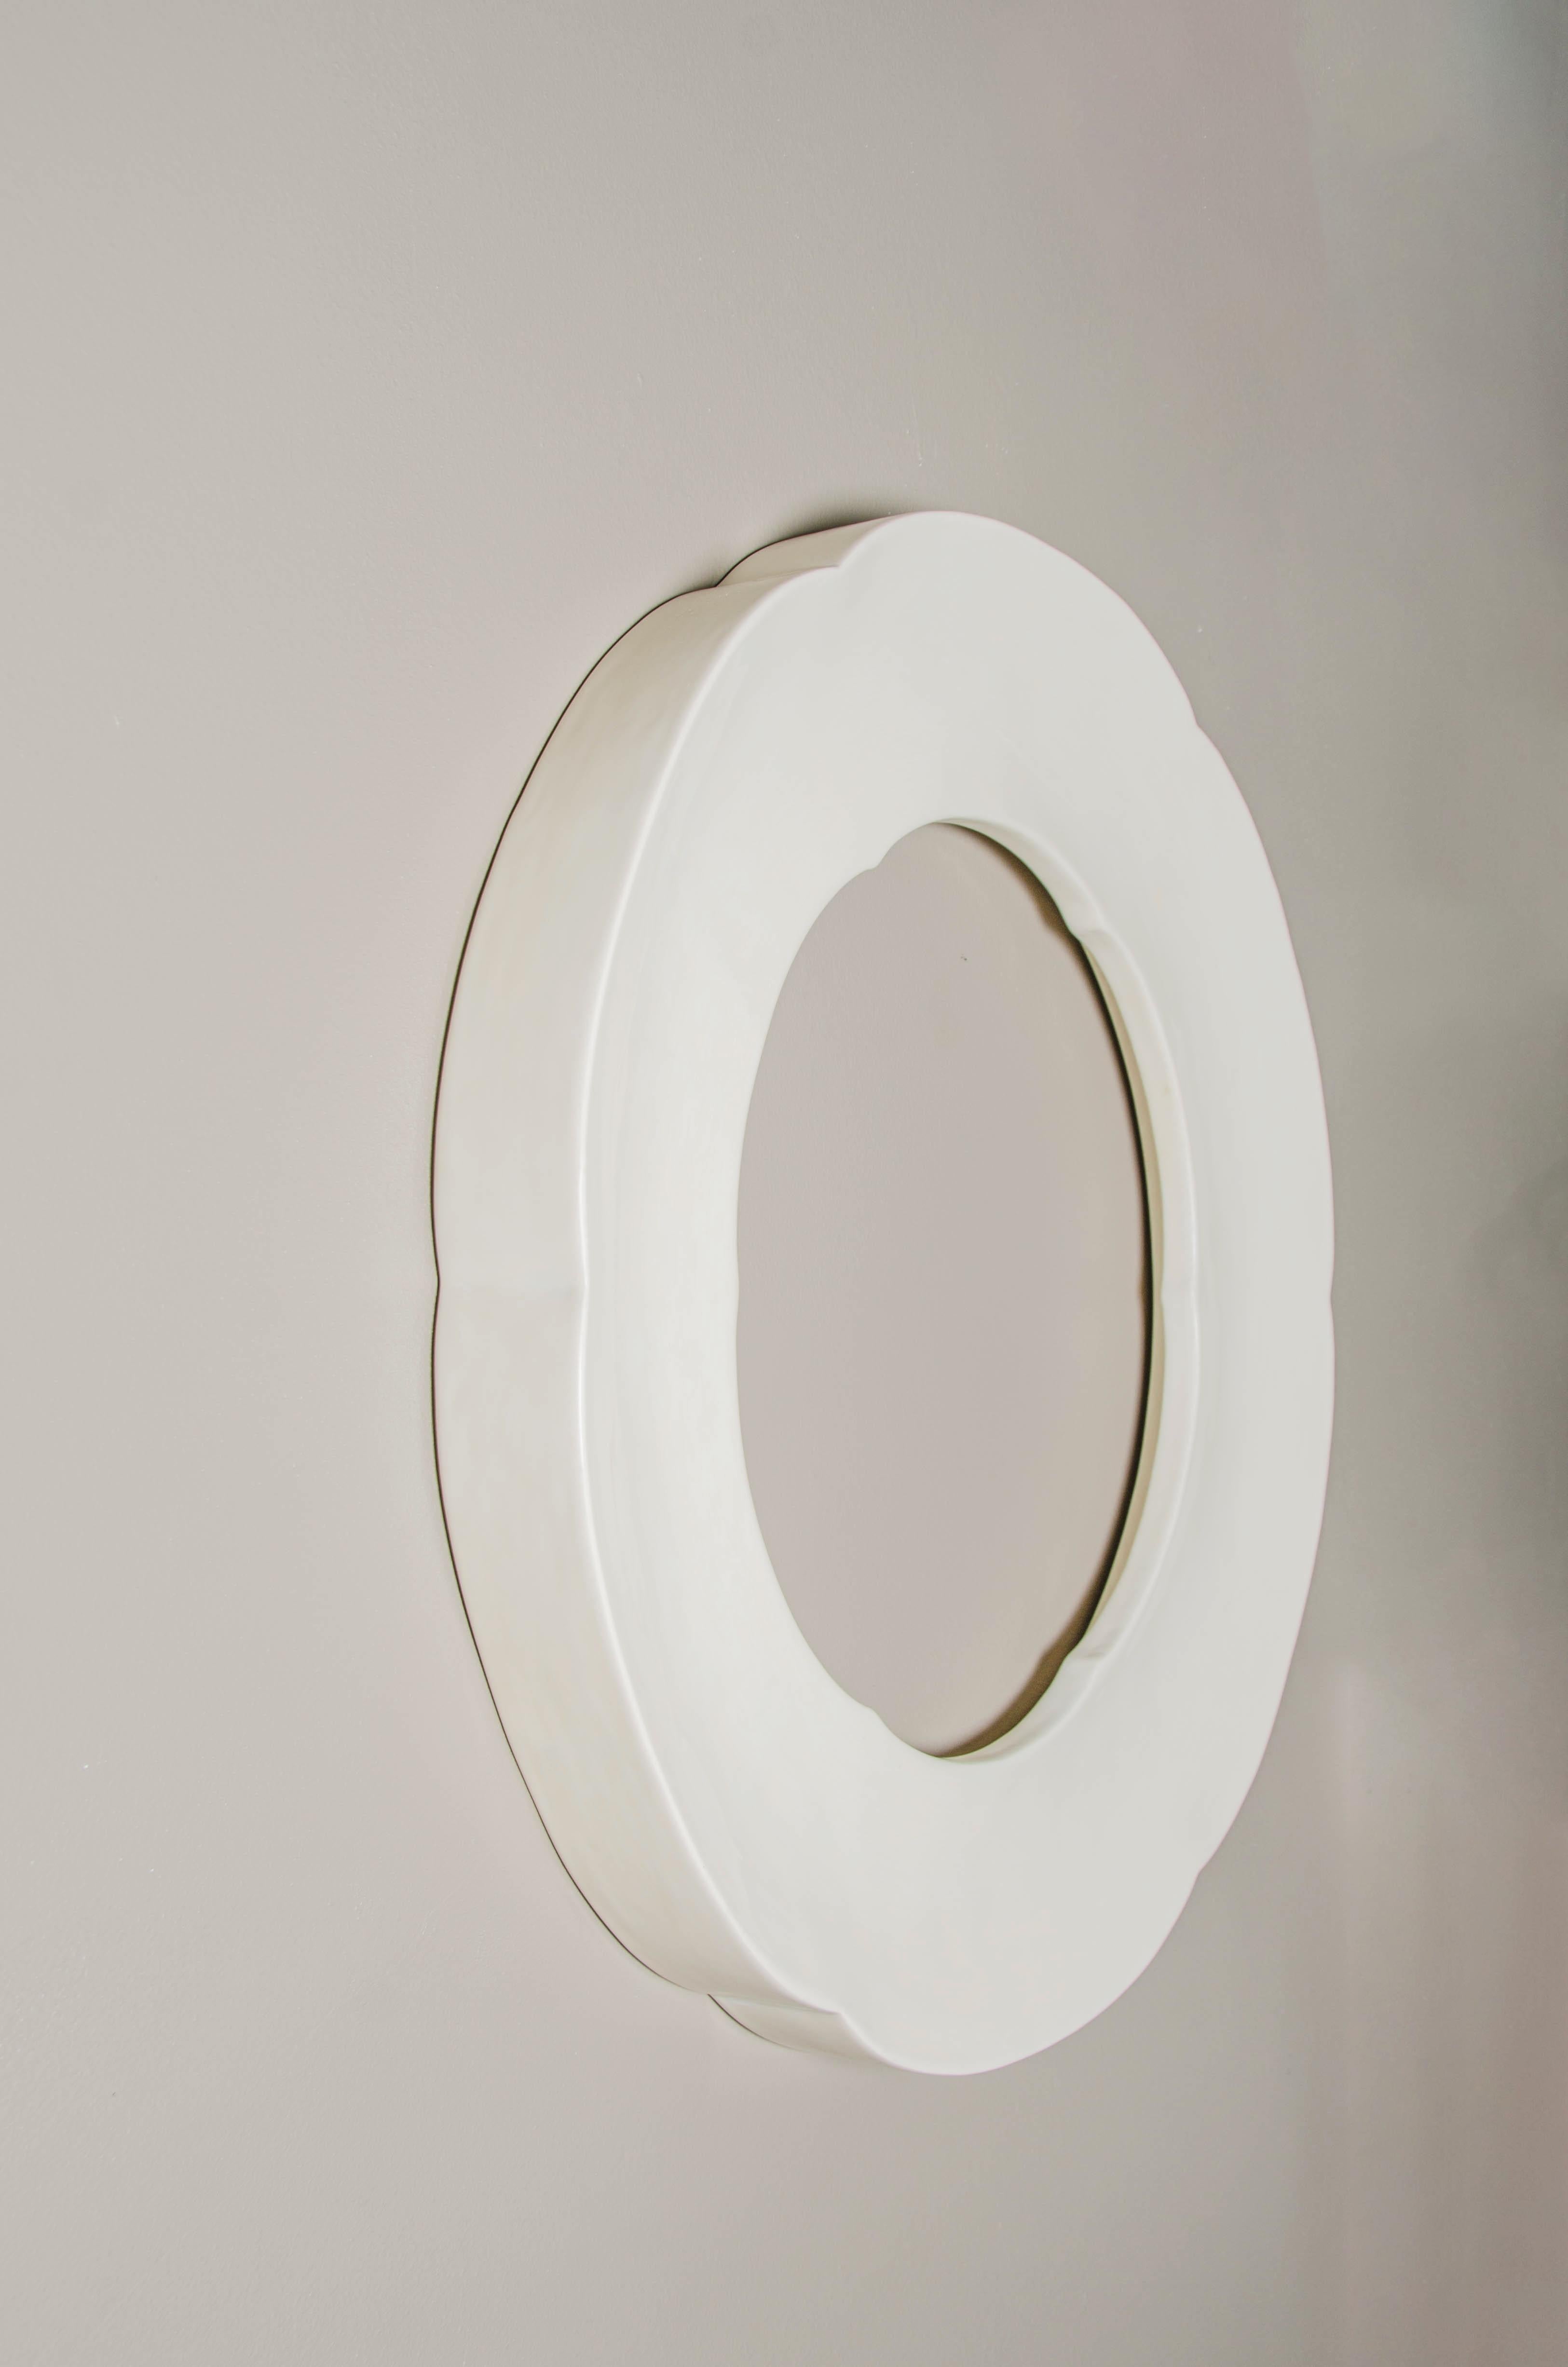 Lacquered Six Petal Mirror, Cream Lacquer by Robert Kuo, Limited Edition